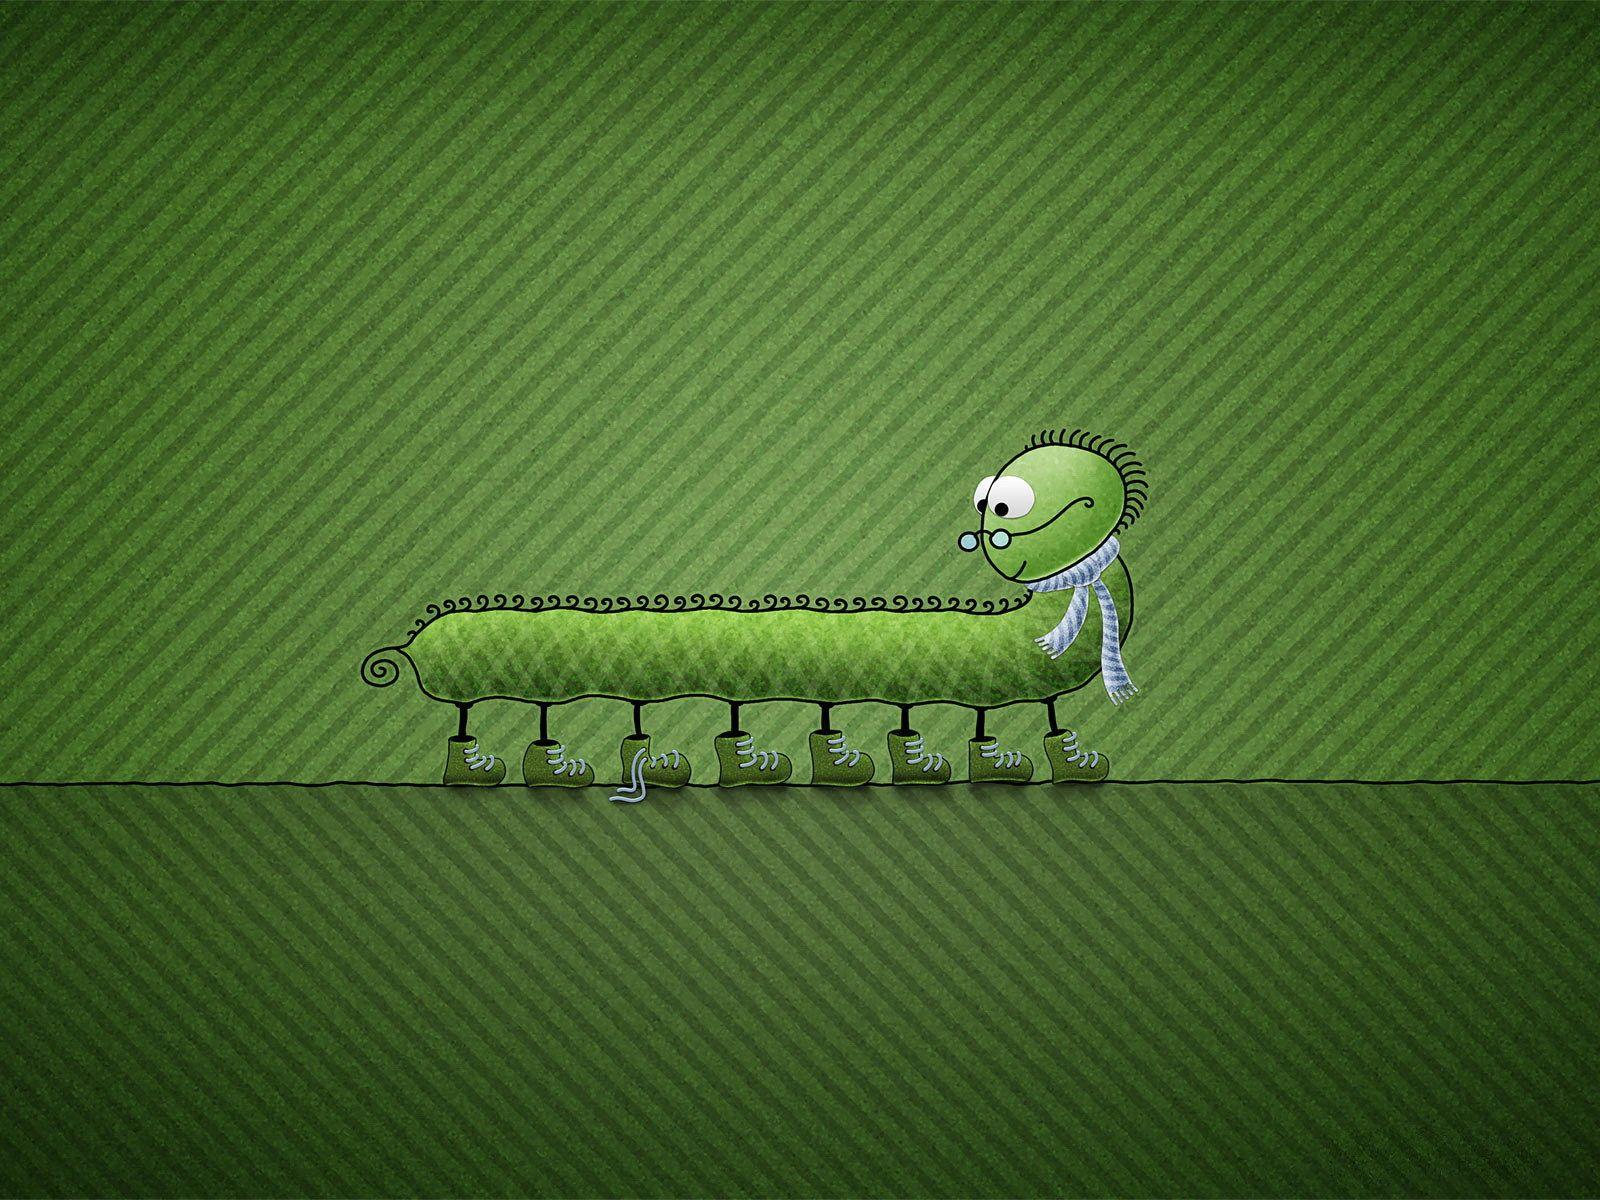 Centipede in glasses on a green background wallpaper and image